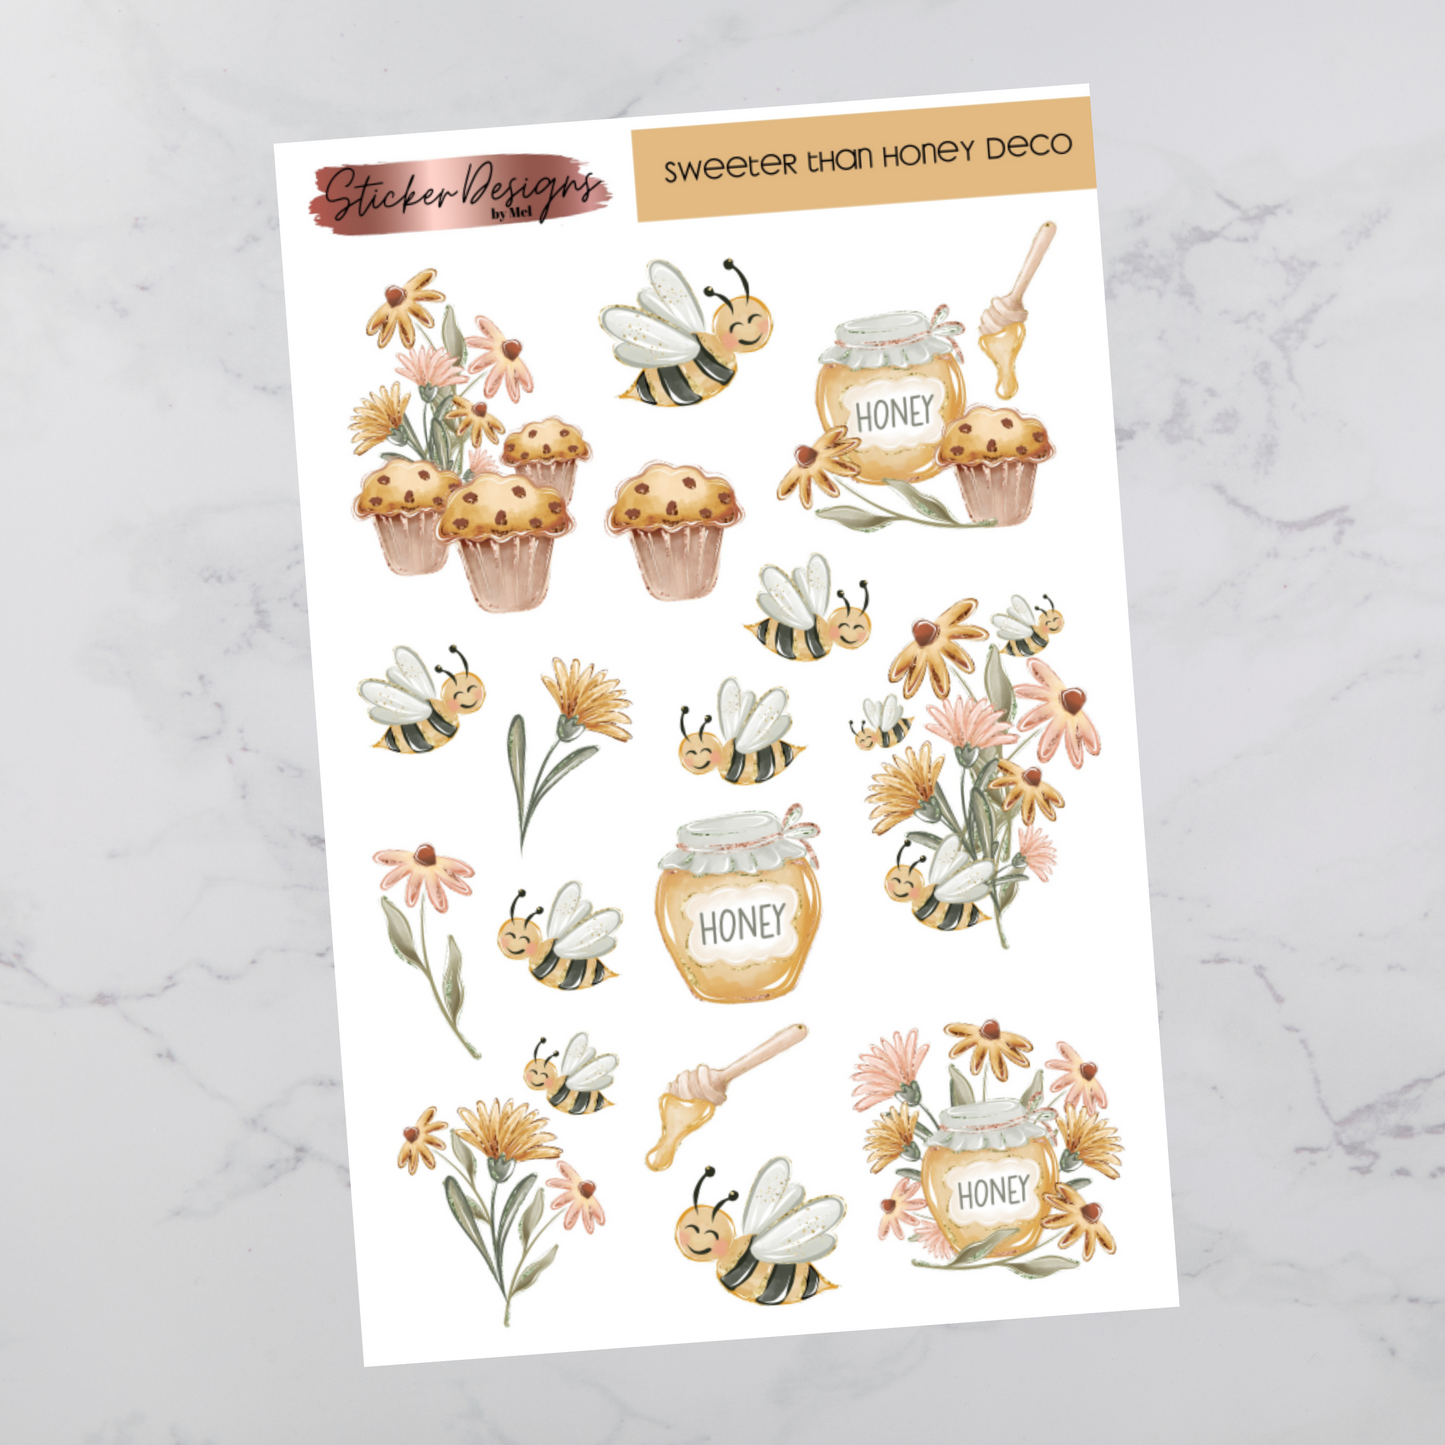 Sweeter Than Honey - Deco Stickers